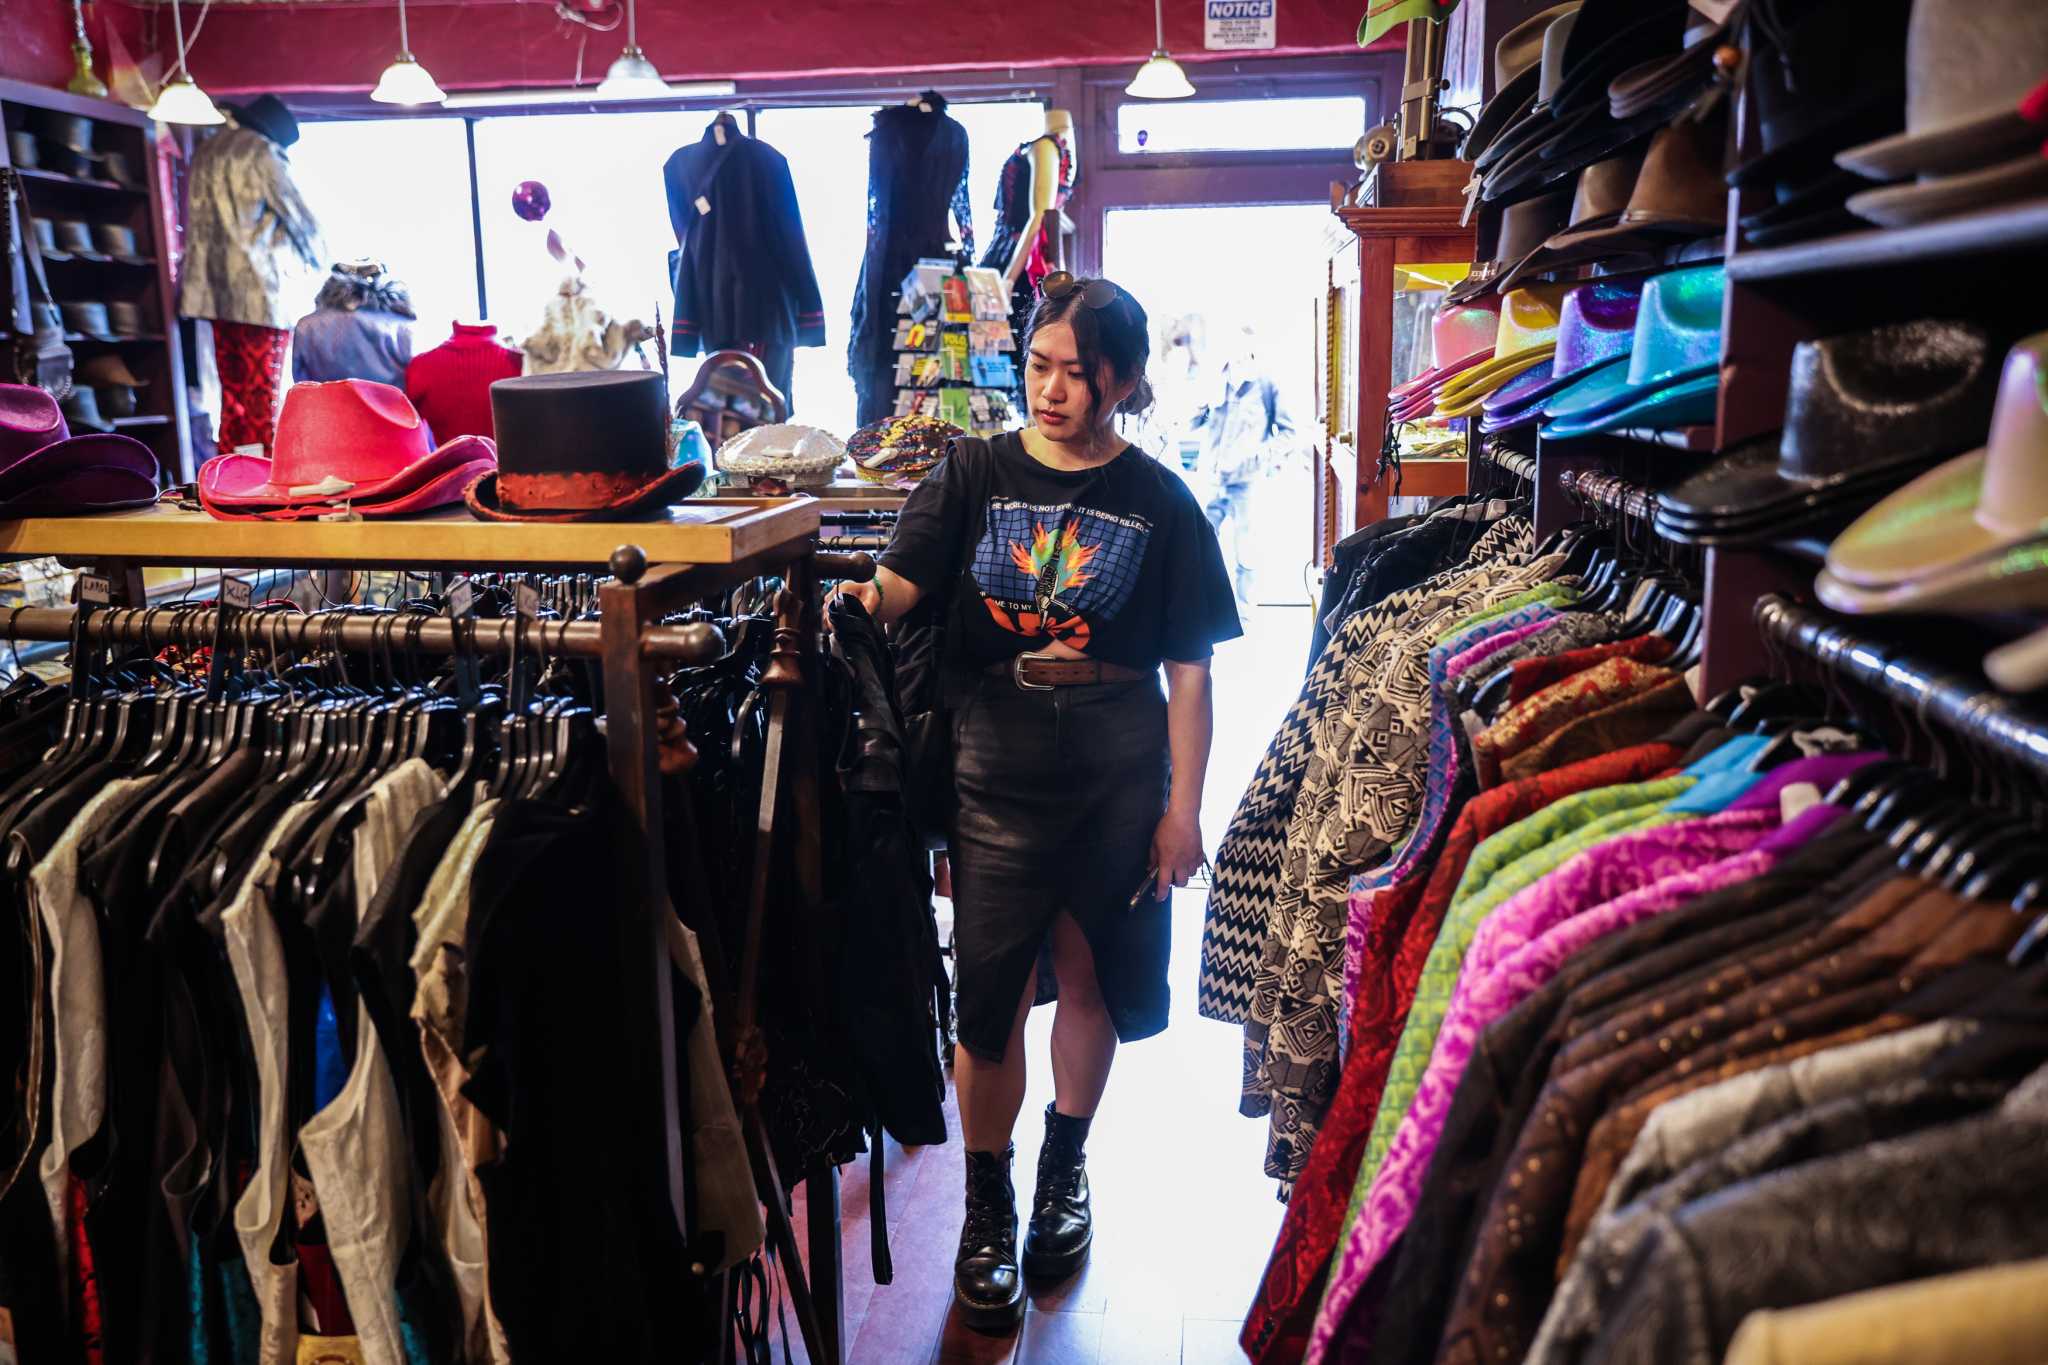 One of Haight-Ashbury's oldest stores could close after 41 years